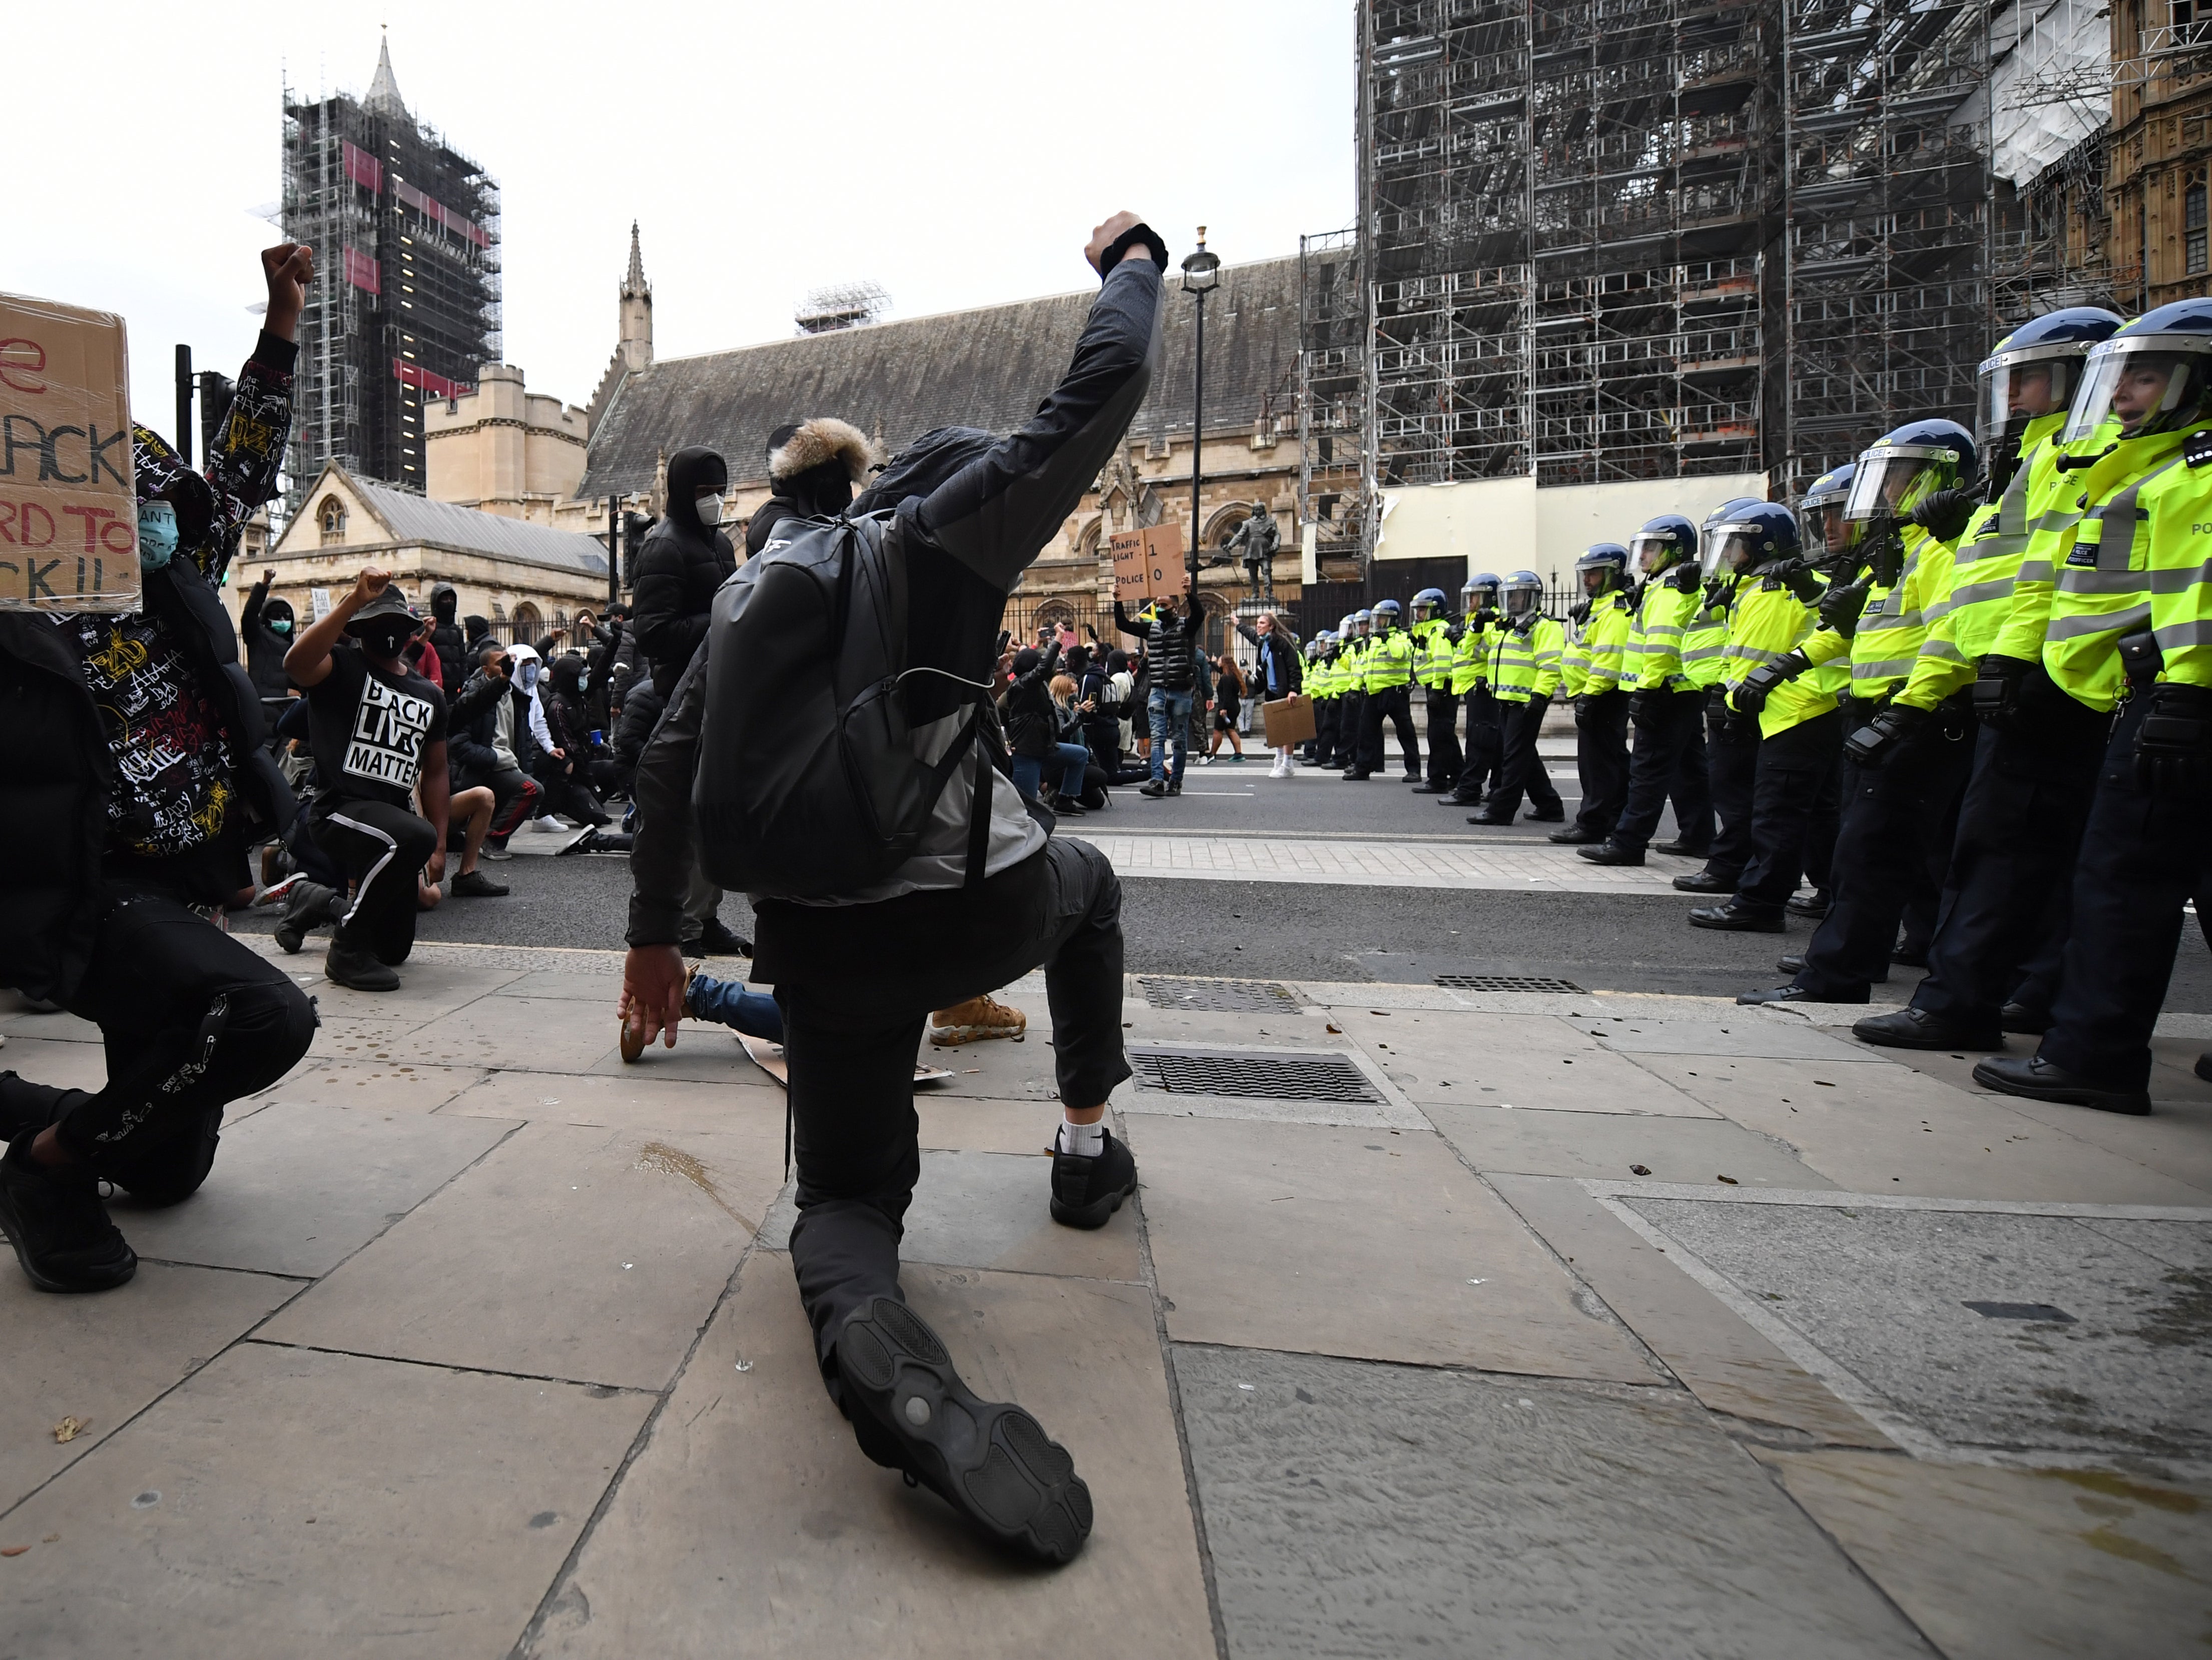 Protesters kneel and raise their fists in the air as police officers line up outside the Houses of Parliament during a protest last summer